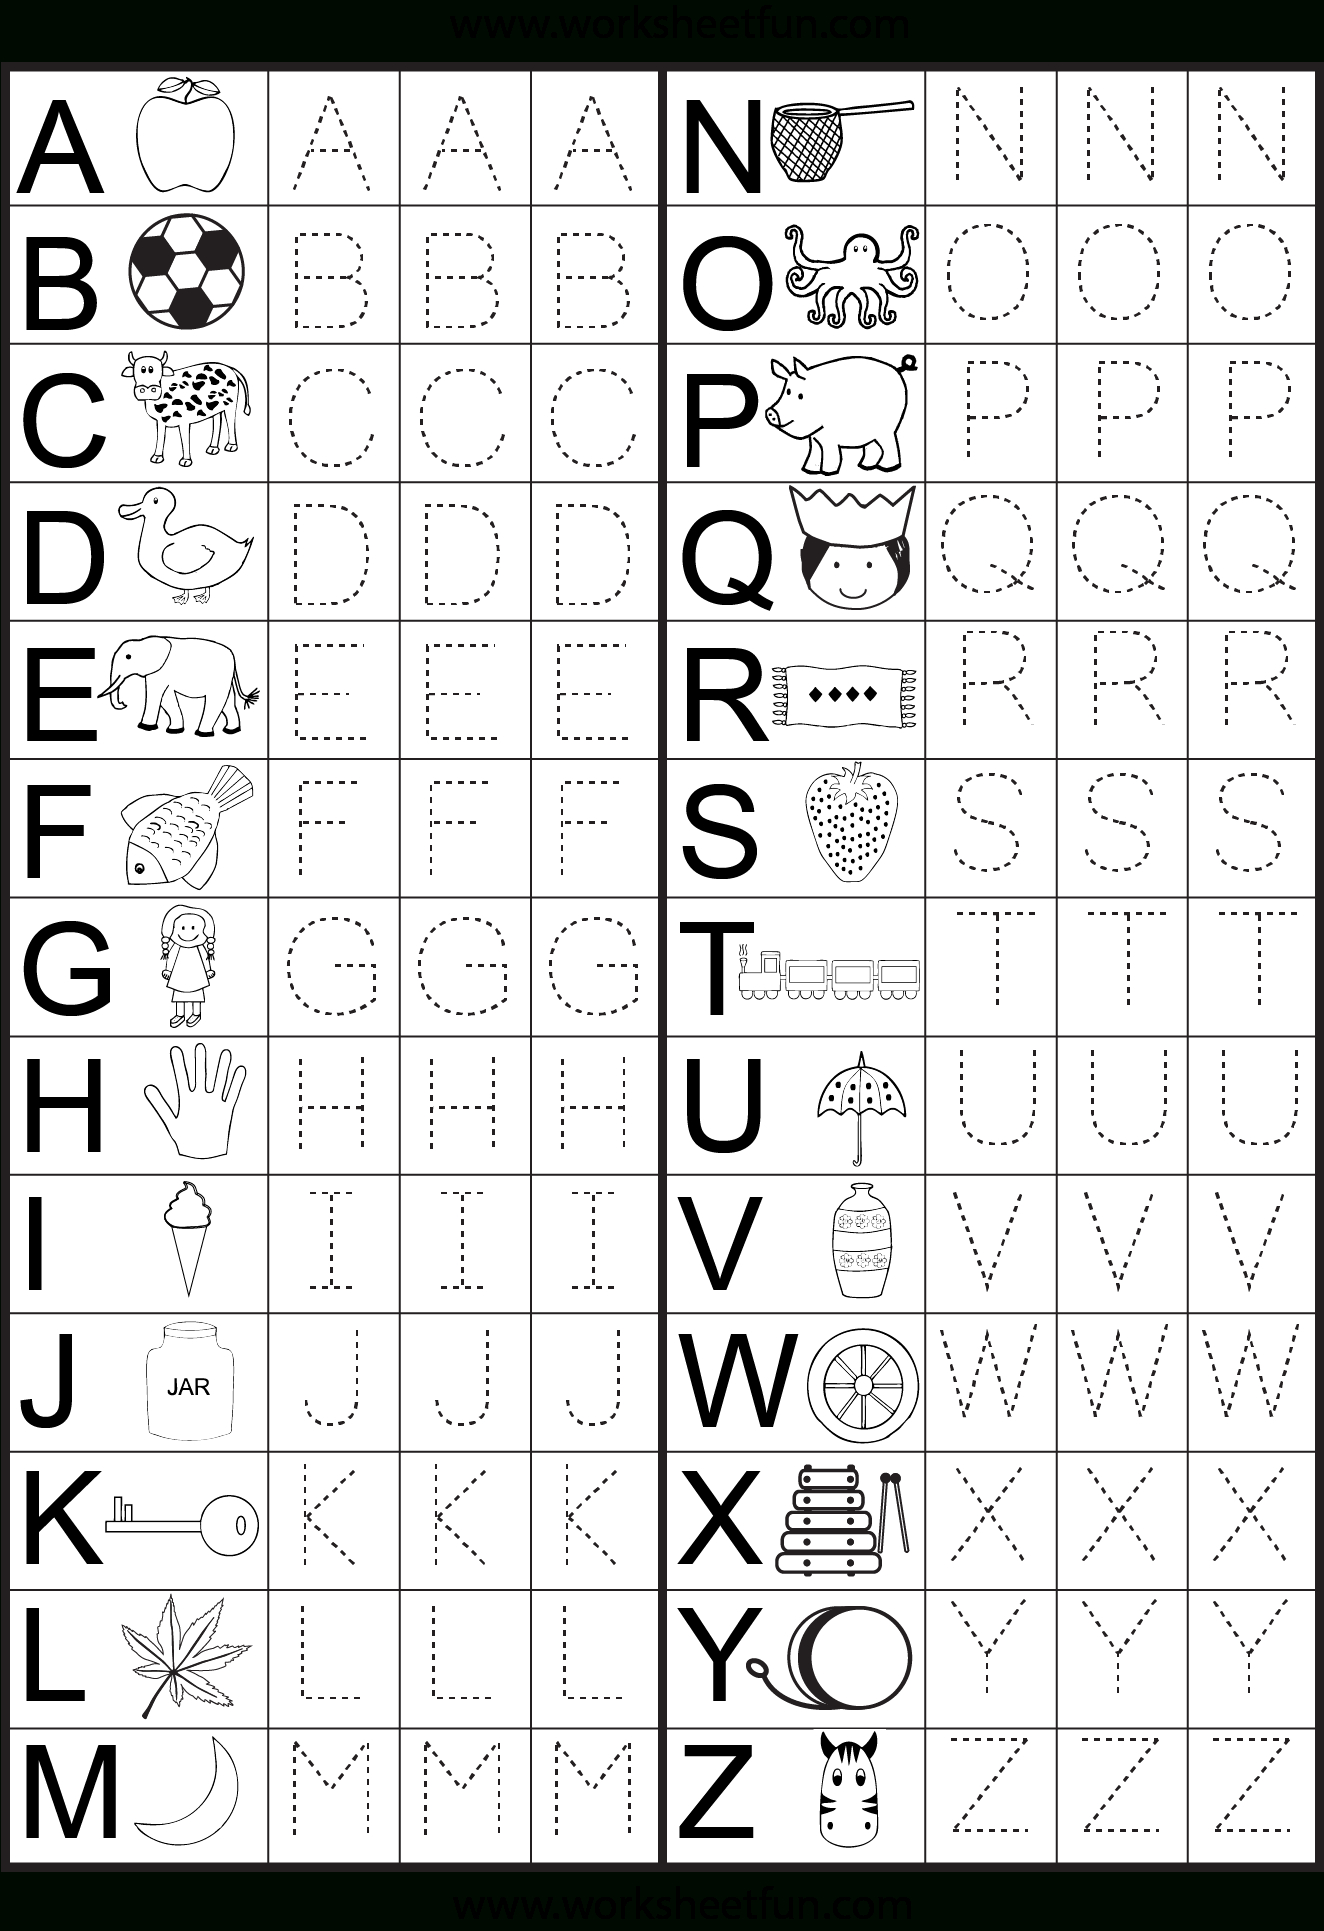 I Just Printed Off 13 Worksheets From This Website inside Tracing Letters And Numbers For Toddlers